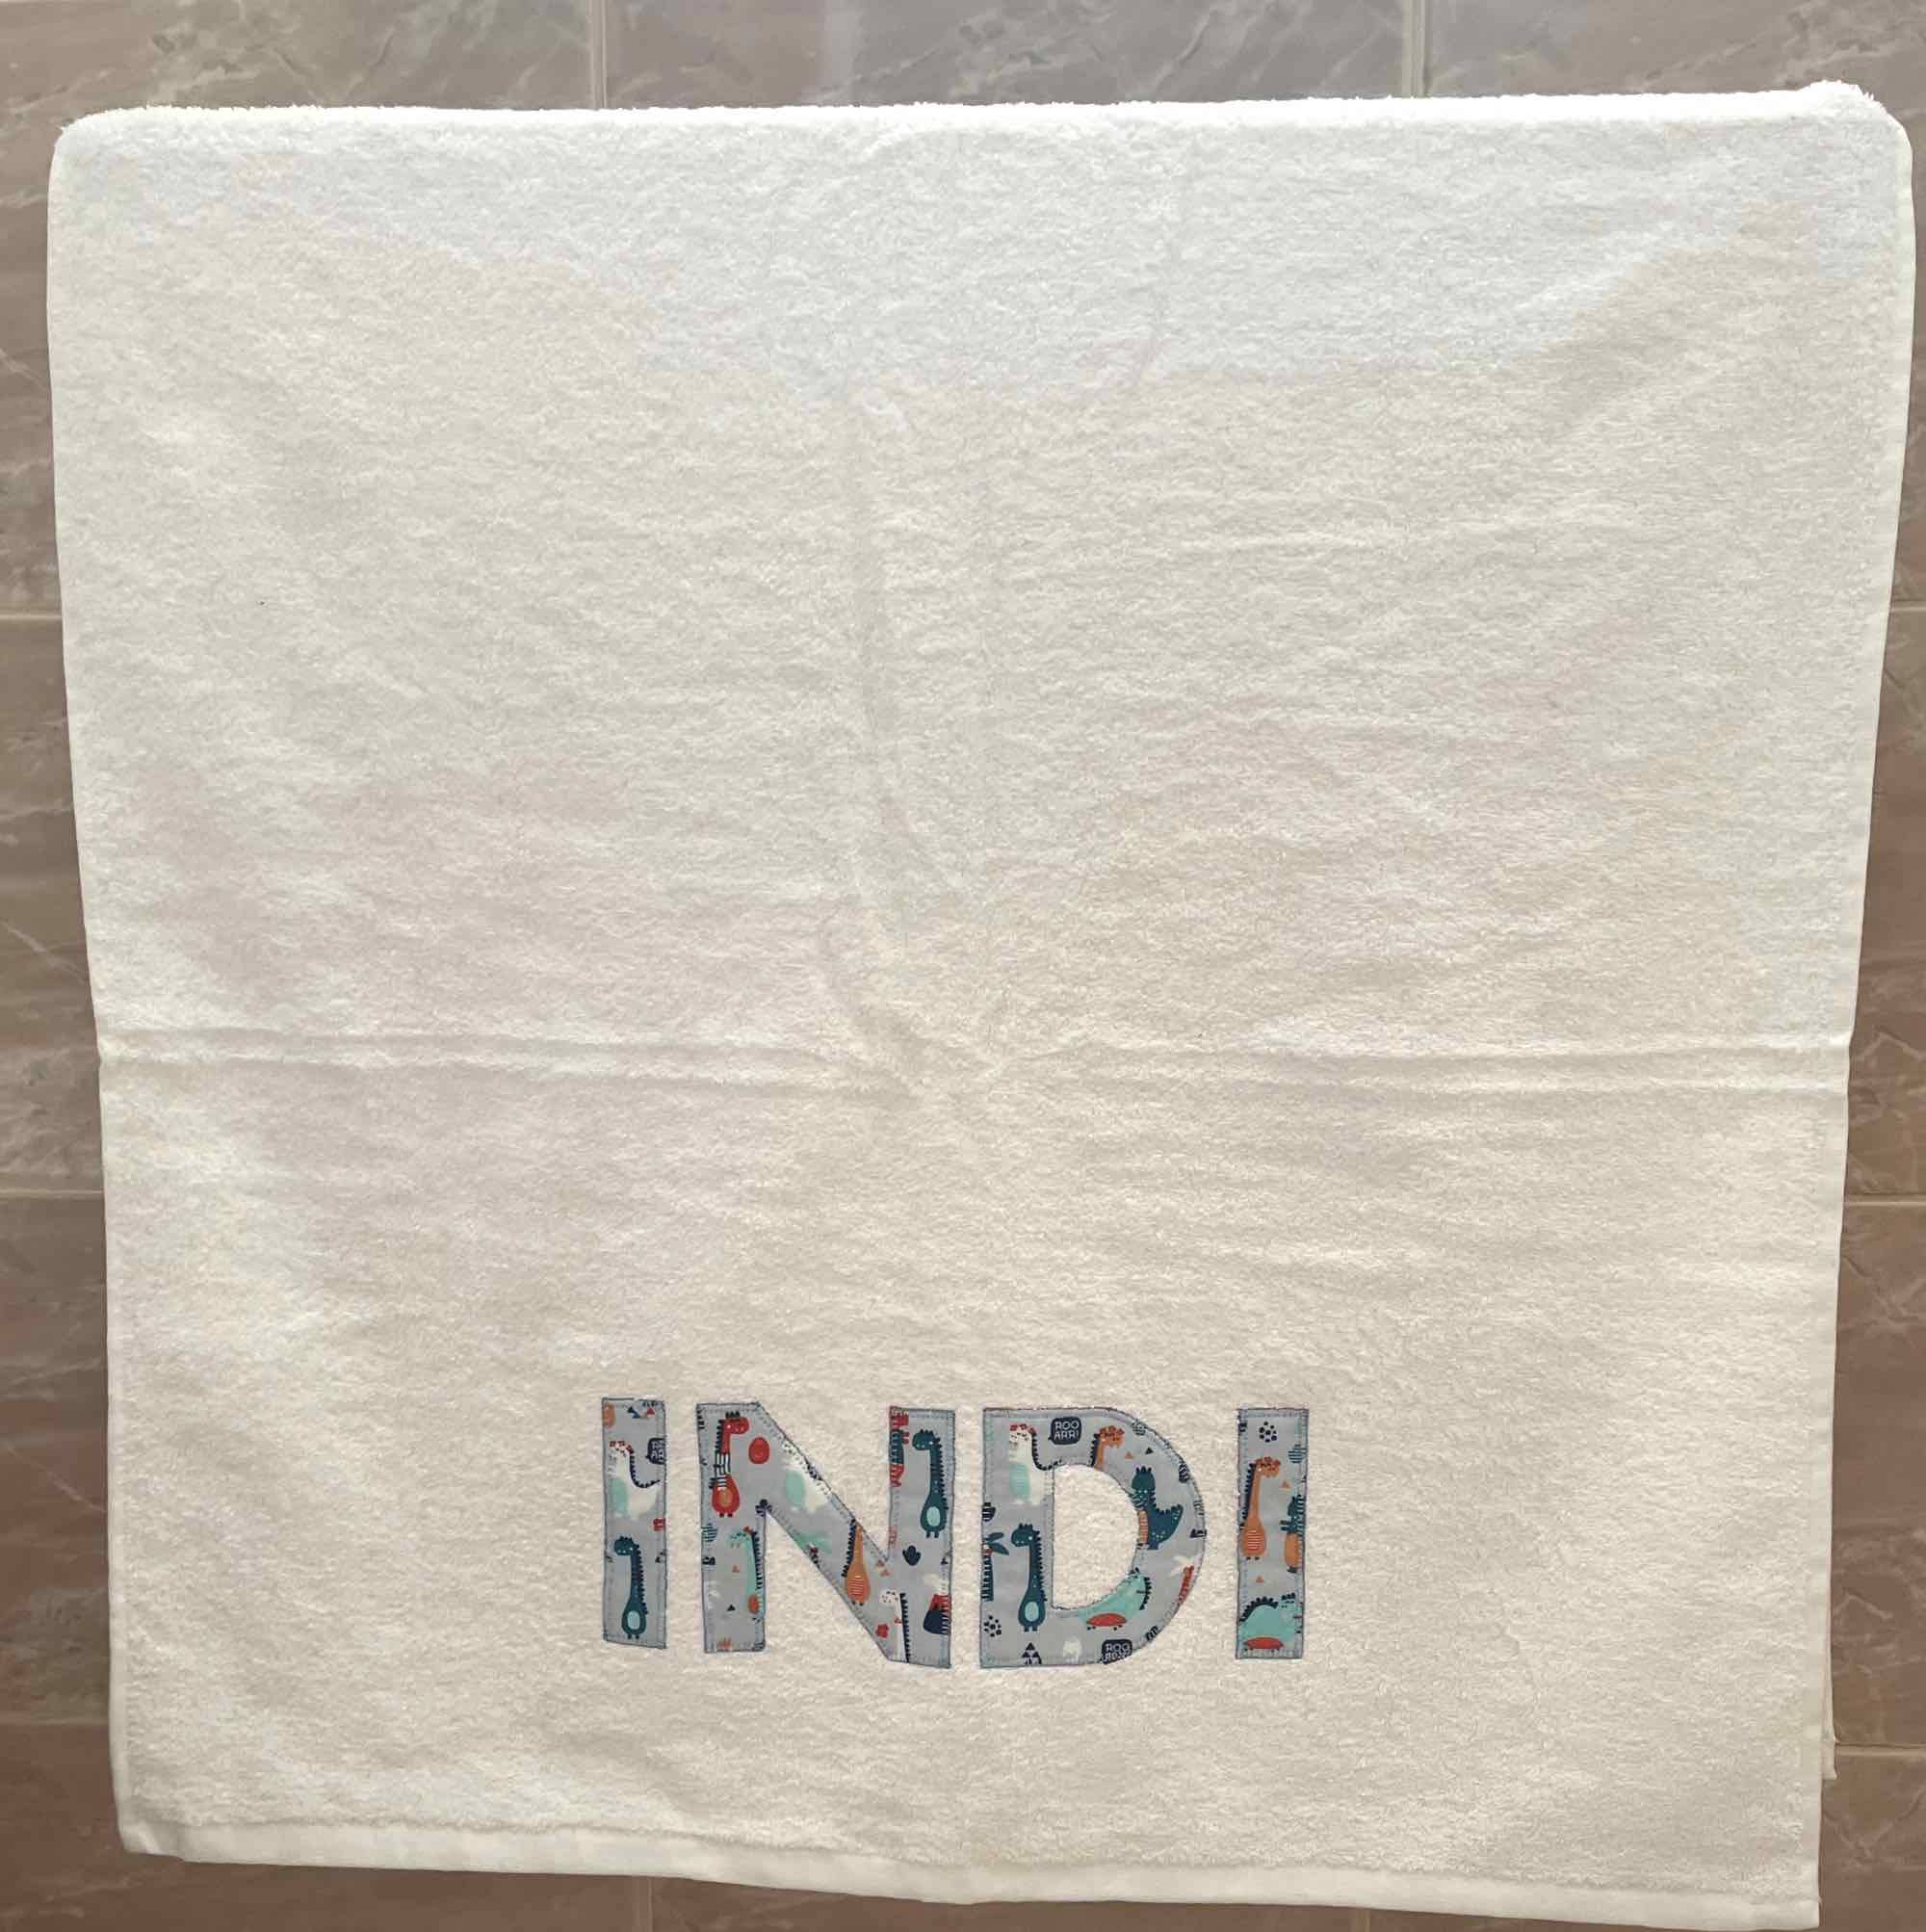 Embroidred and Applique Towels and Towel sets